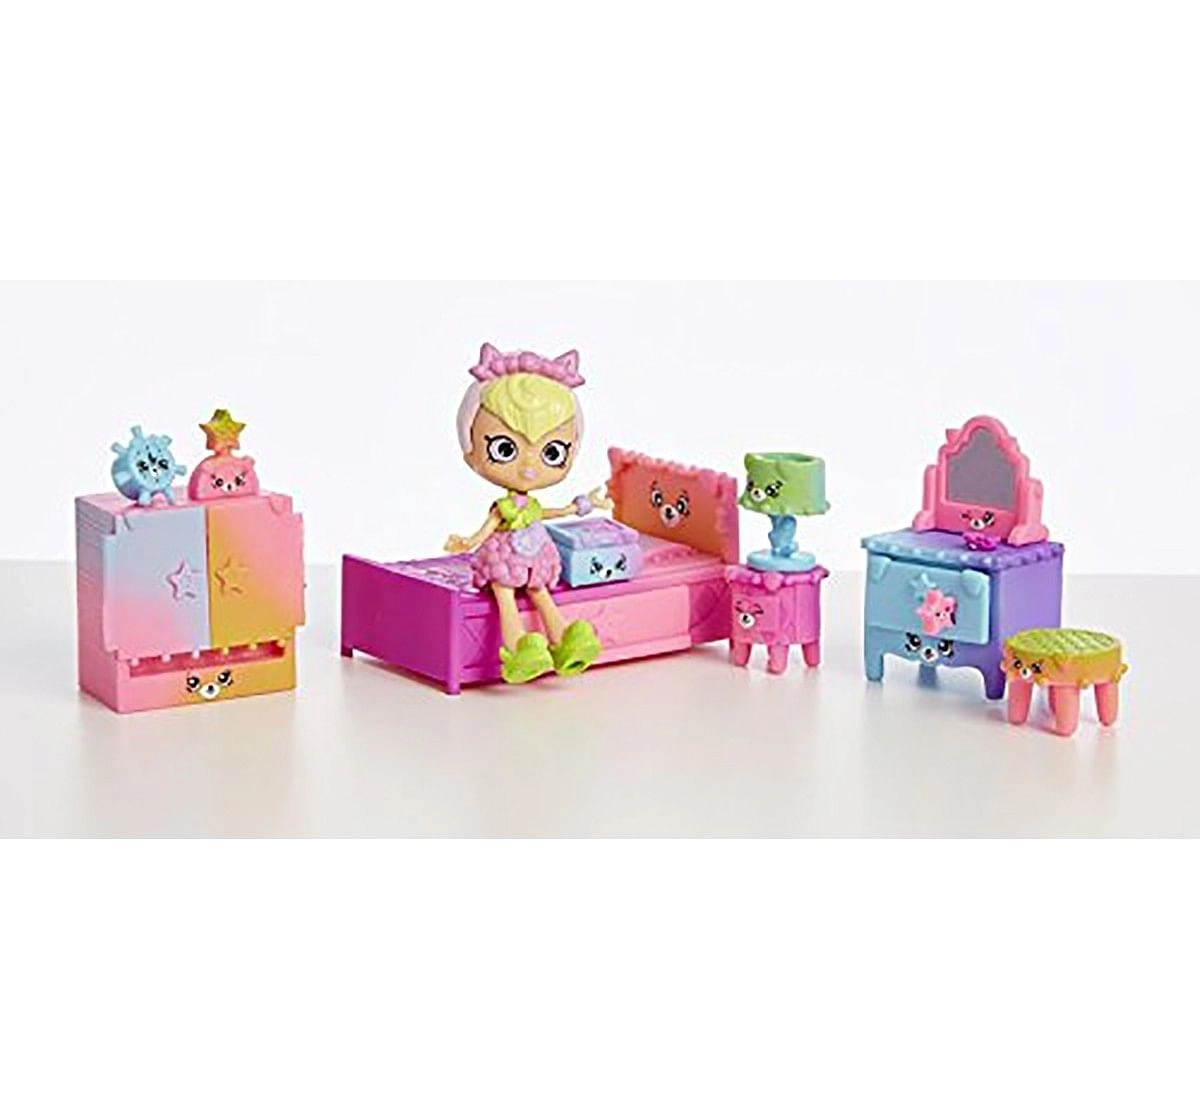 Shopkins Happy Places Rainbow Beach Furniture Set - Sleepy Shores Collectible Dolls for age 4Y+ 